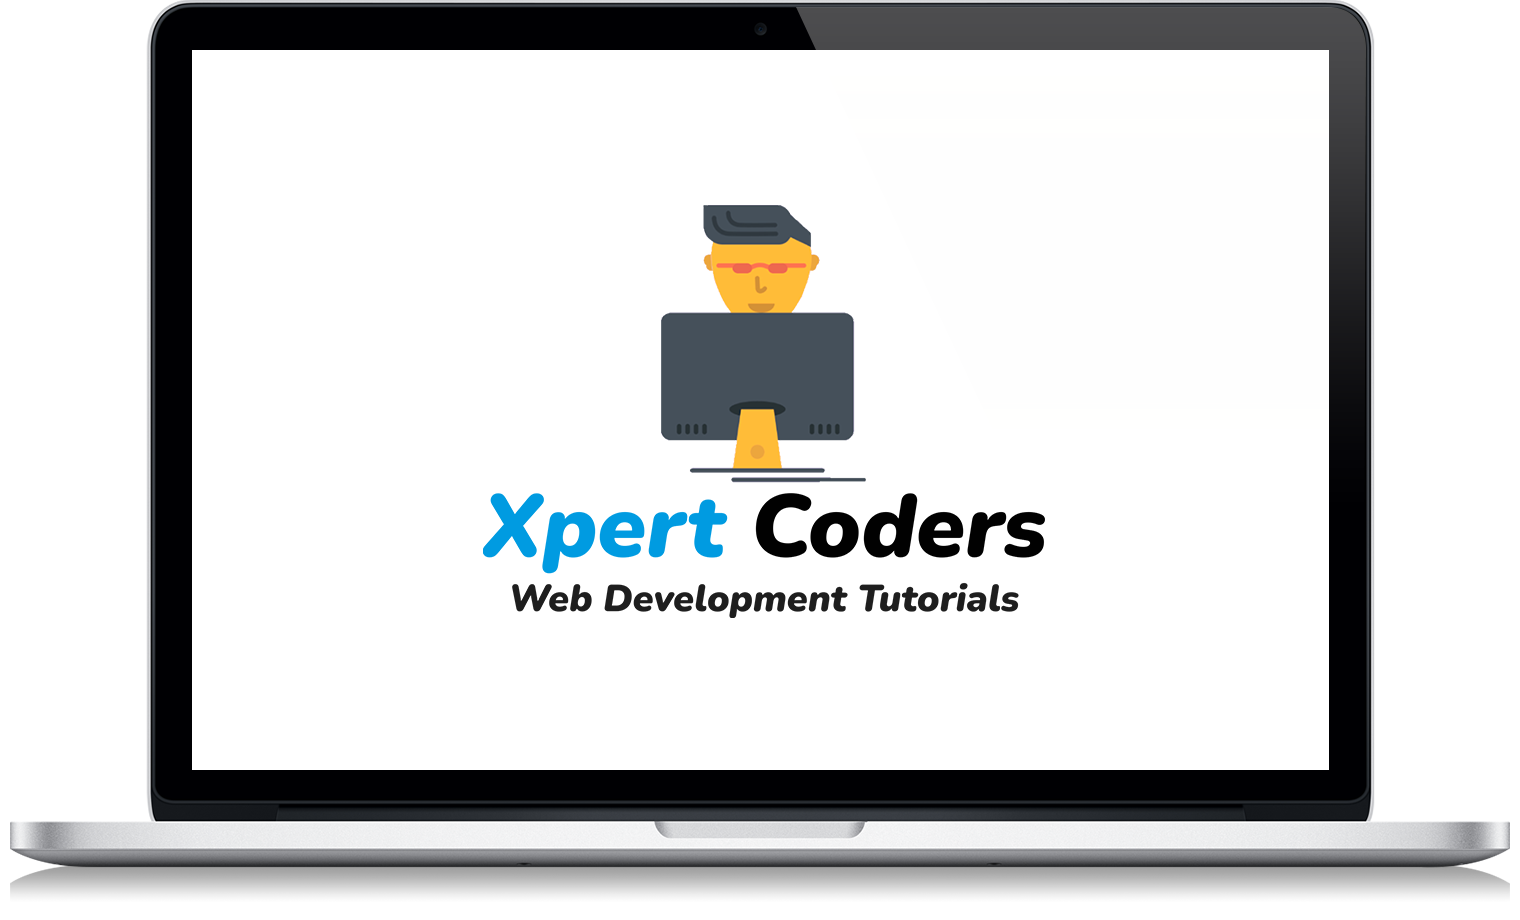 About Us - Meet the Team at Xpert Coders, your dedicated partners in crafting exceptional websites and mobile apps